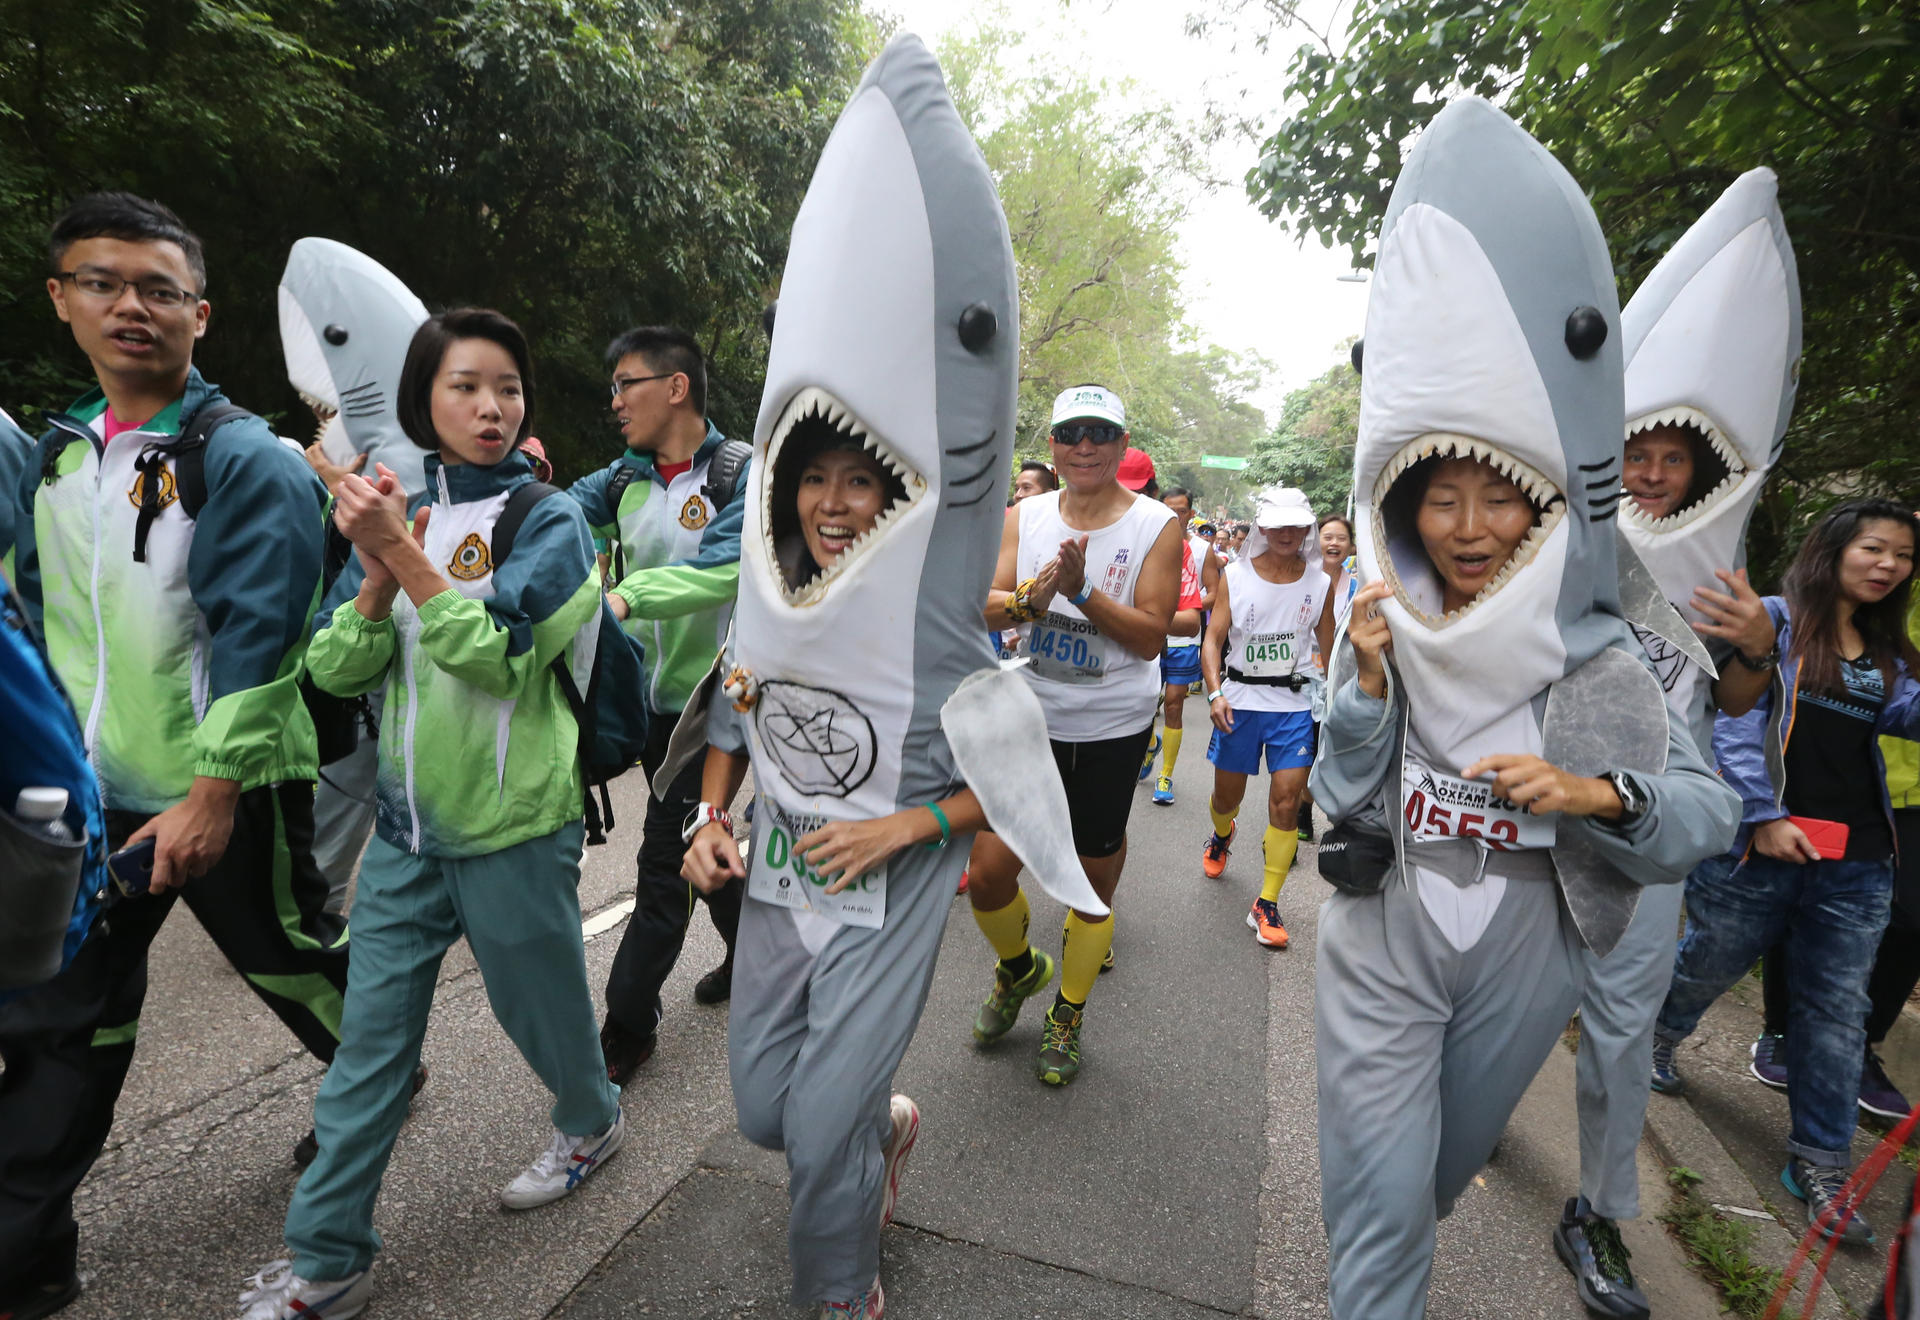 This year's Oxfam Trailwalker is "shark-infested", or so it would seem as participants gather at Pak Tam Chung in Sai Kung. Photo: Felix Wong